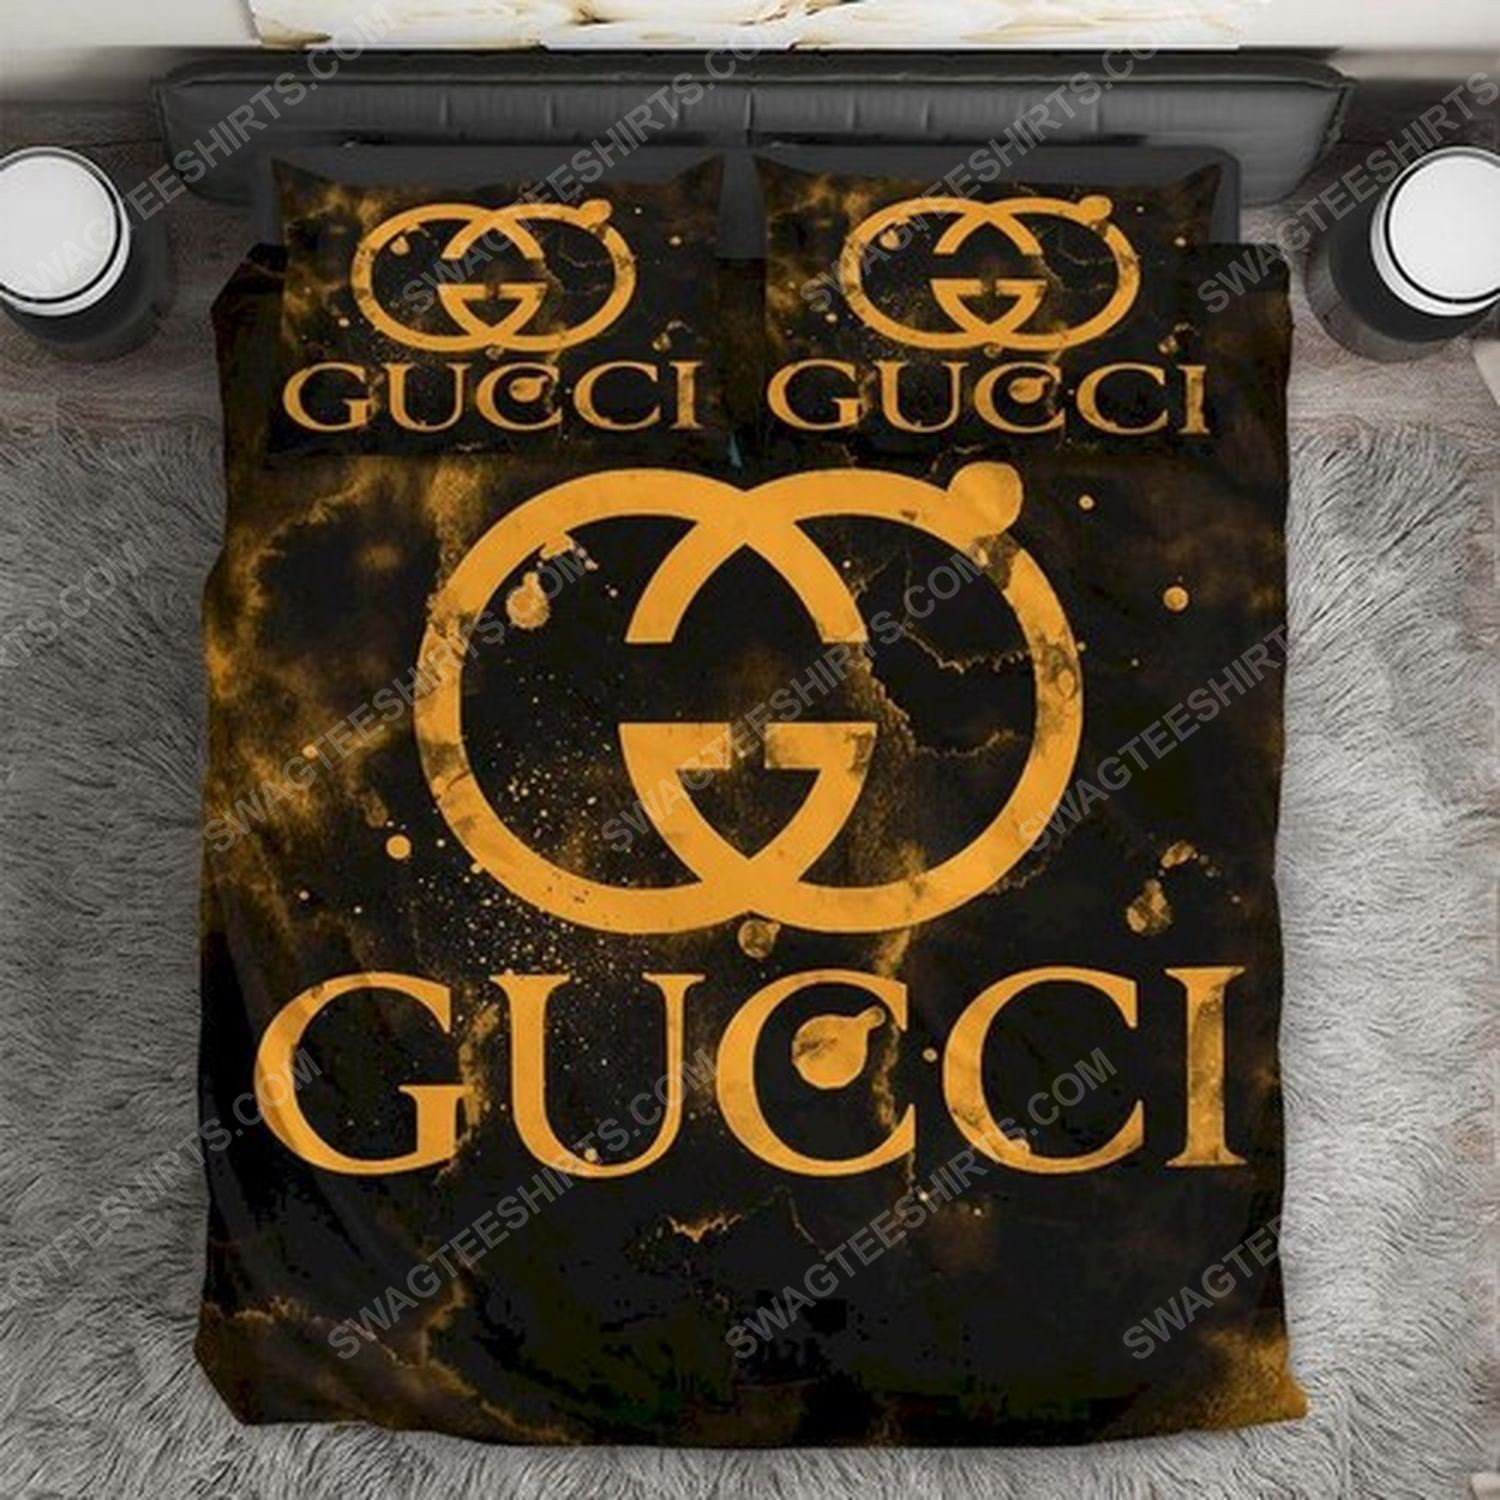 [special edition] Gucci monogram gold version full print duvet cover ...